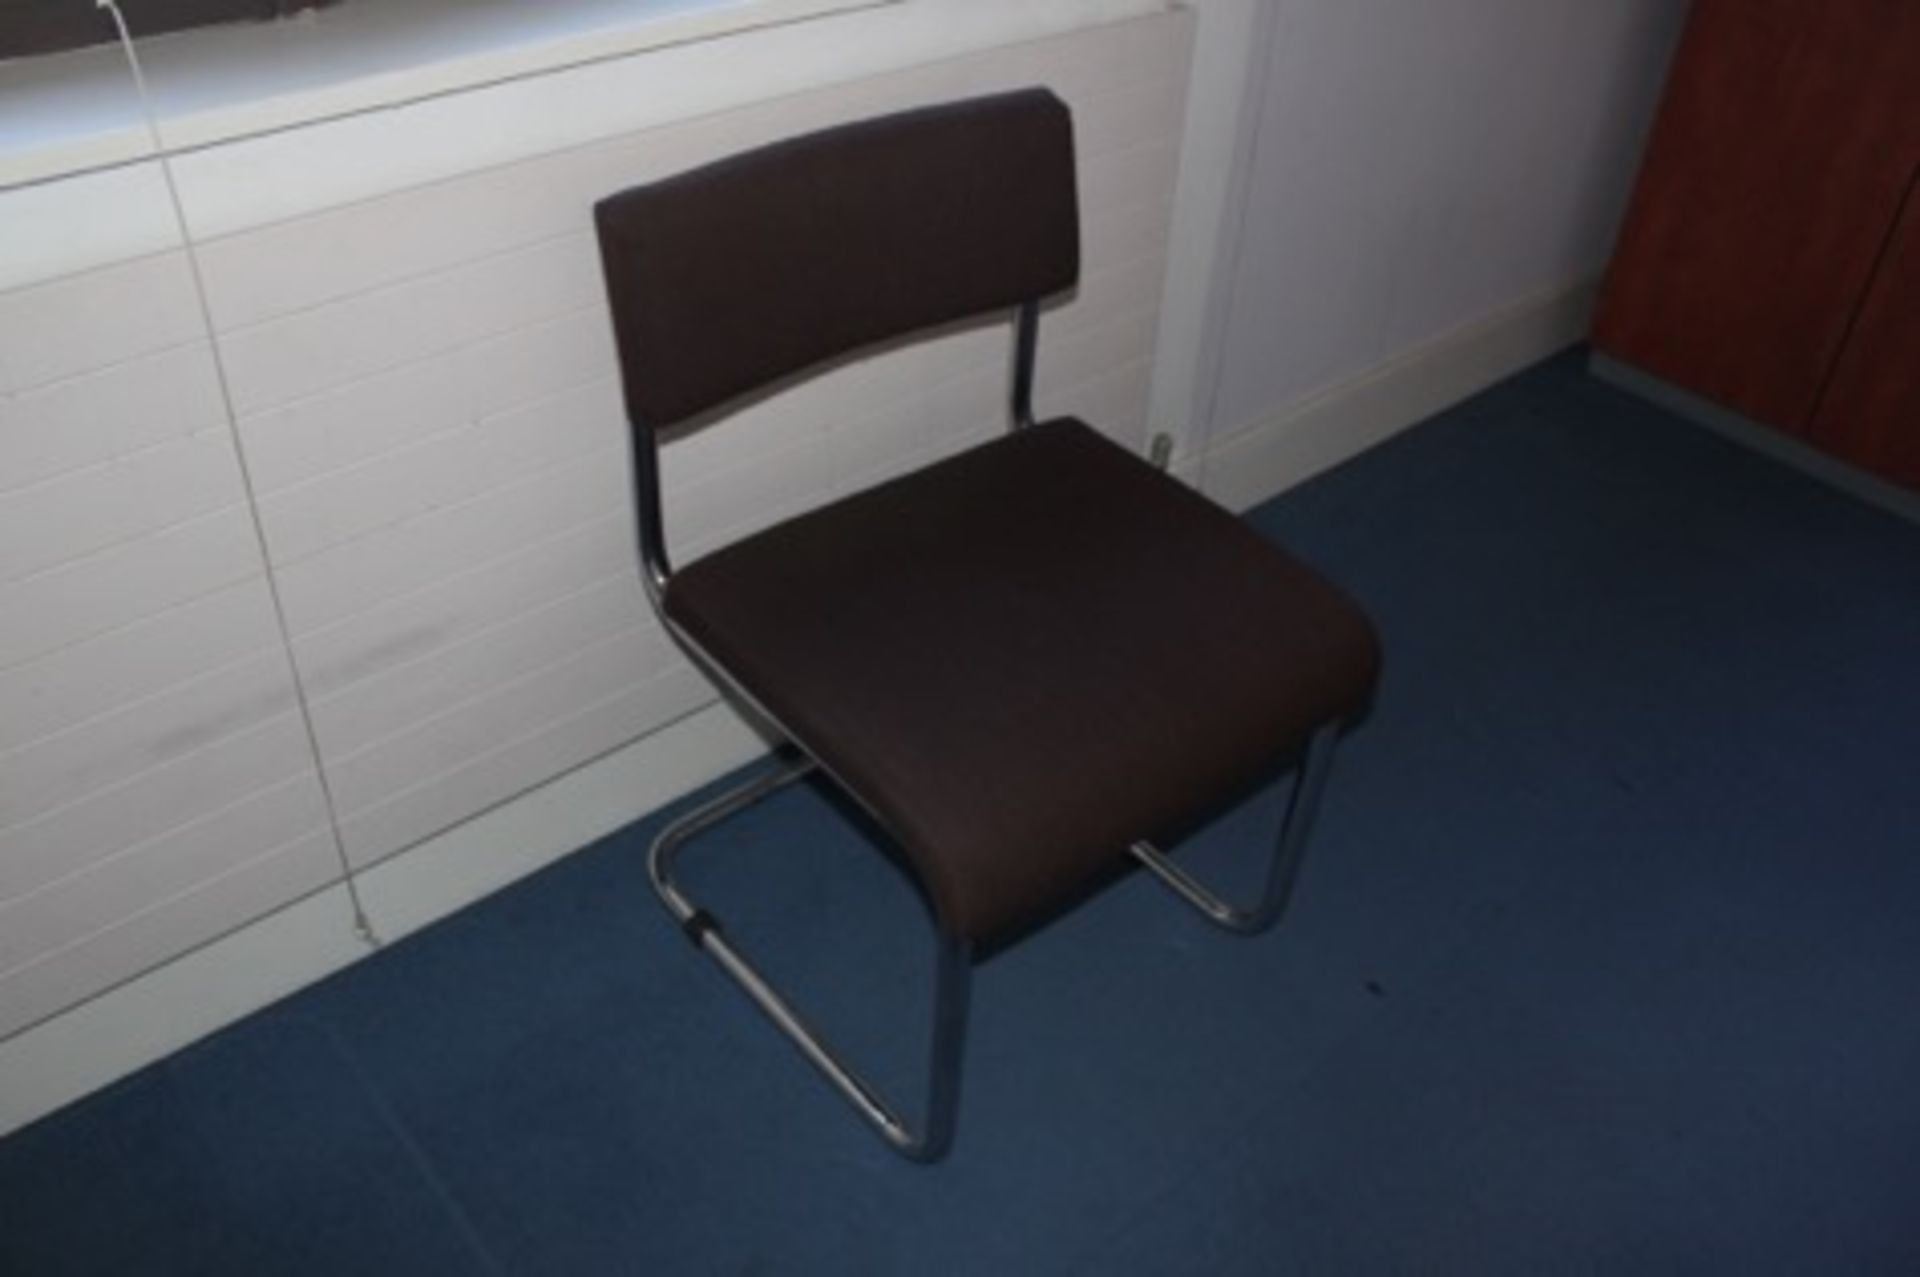 Static Chair wo Arm Rests some signs of use